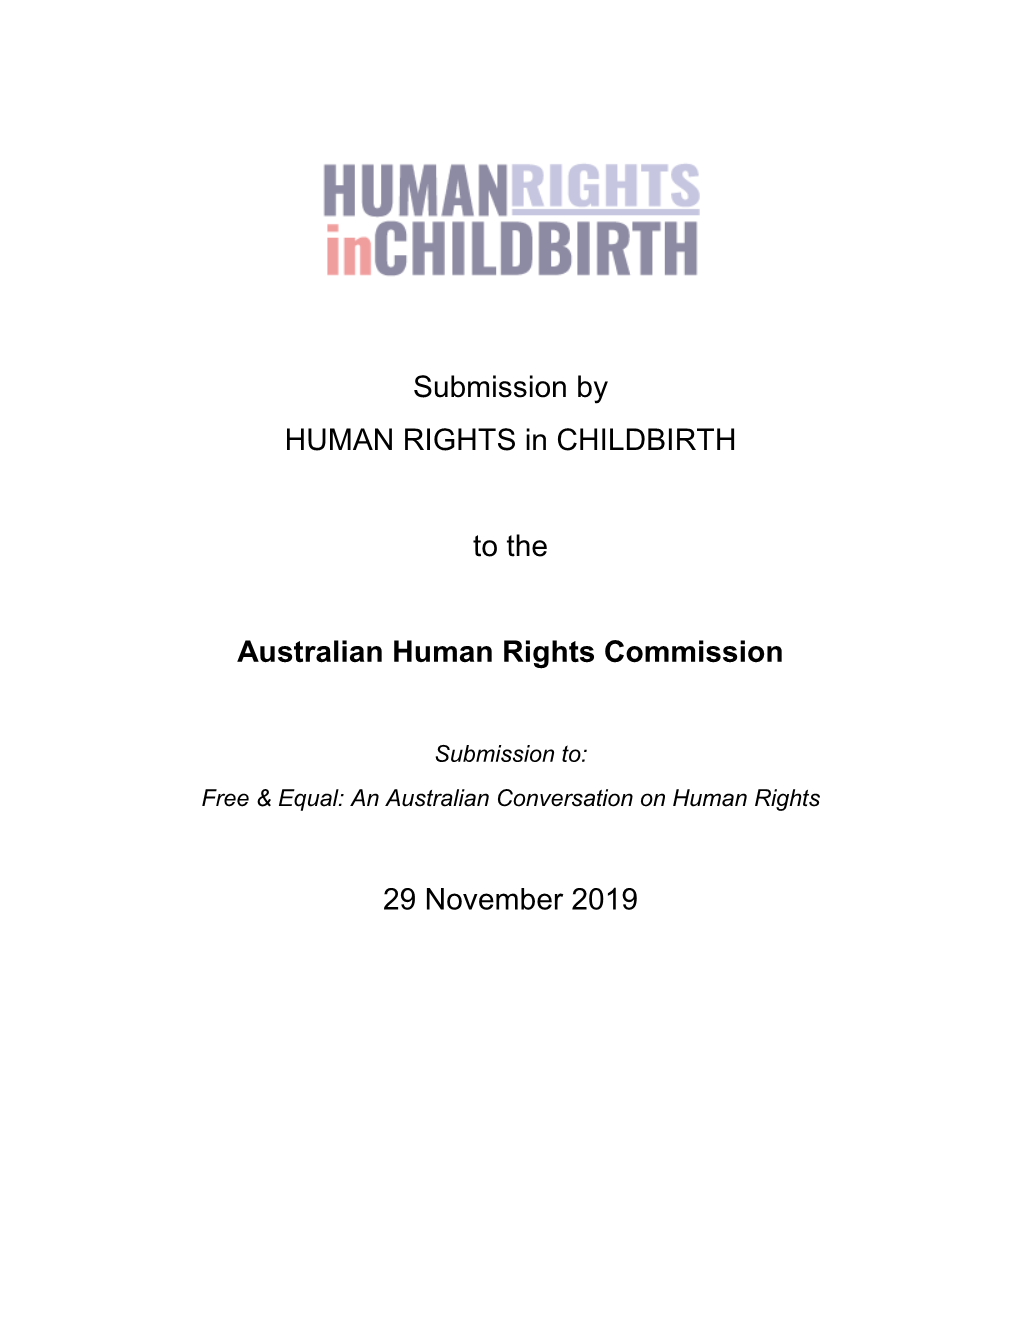 Submission by HUMAN RIGHTS in CHILDBIRTH to the Australian